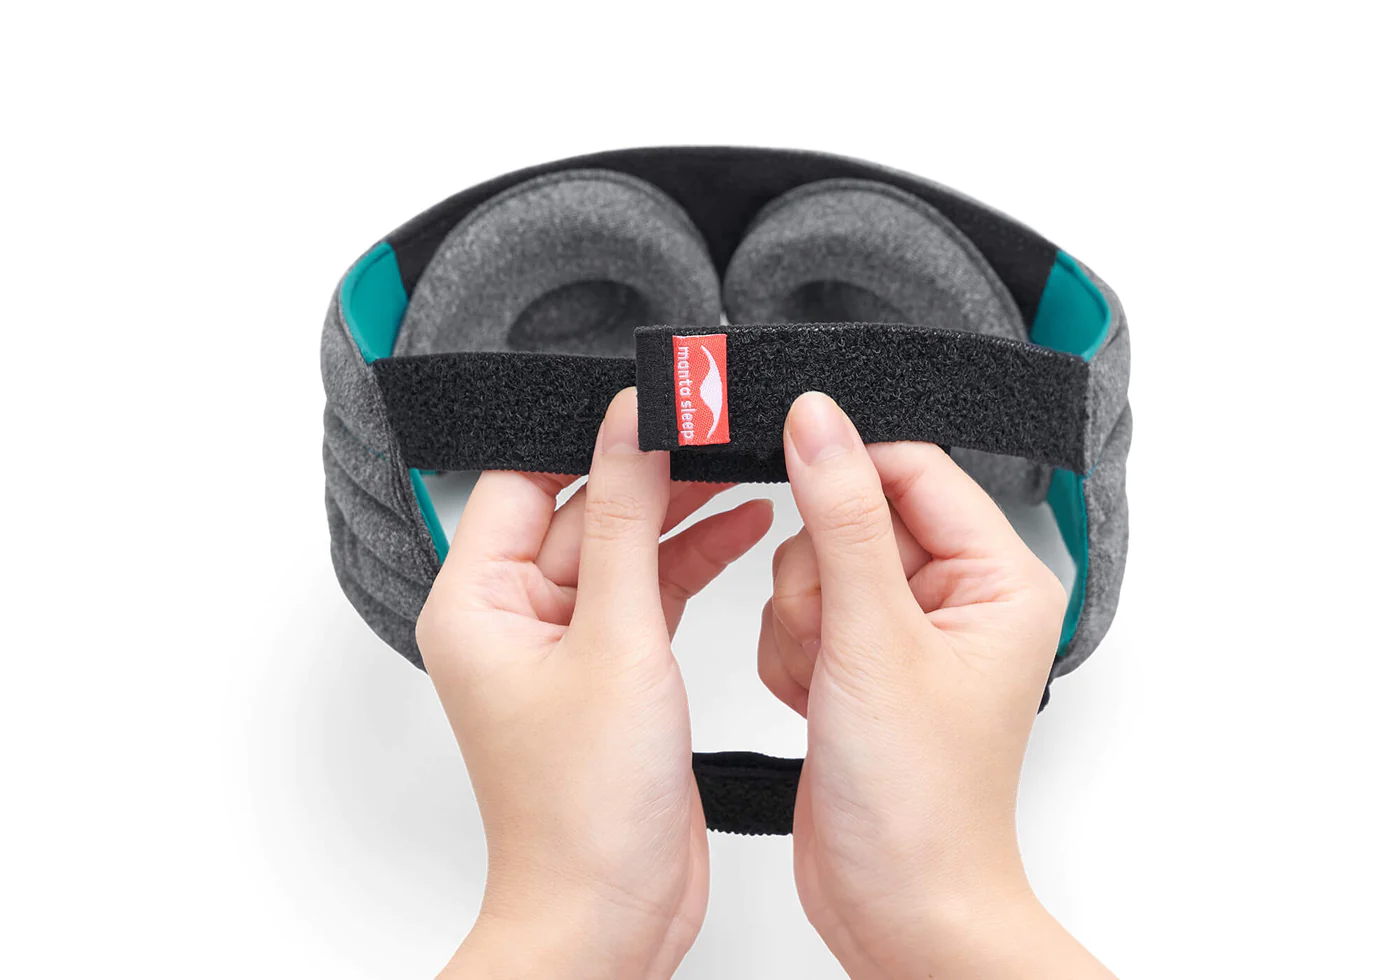 Hands holding the upper headband of a weighted sleep mask for gentle pressure relaxation.